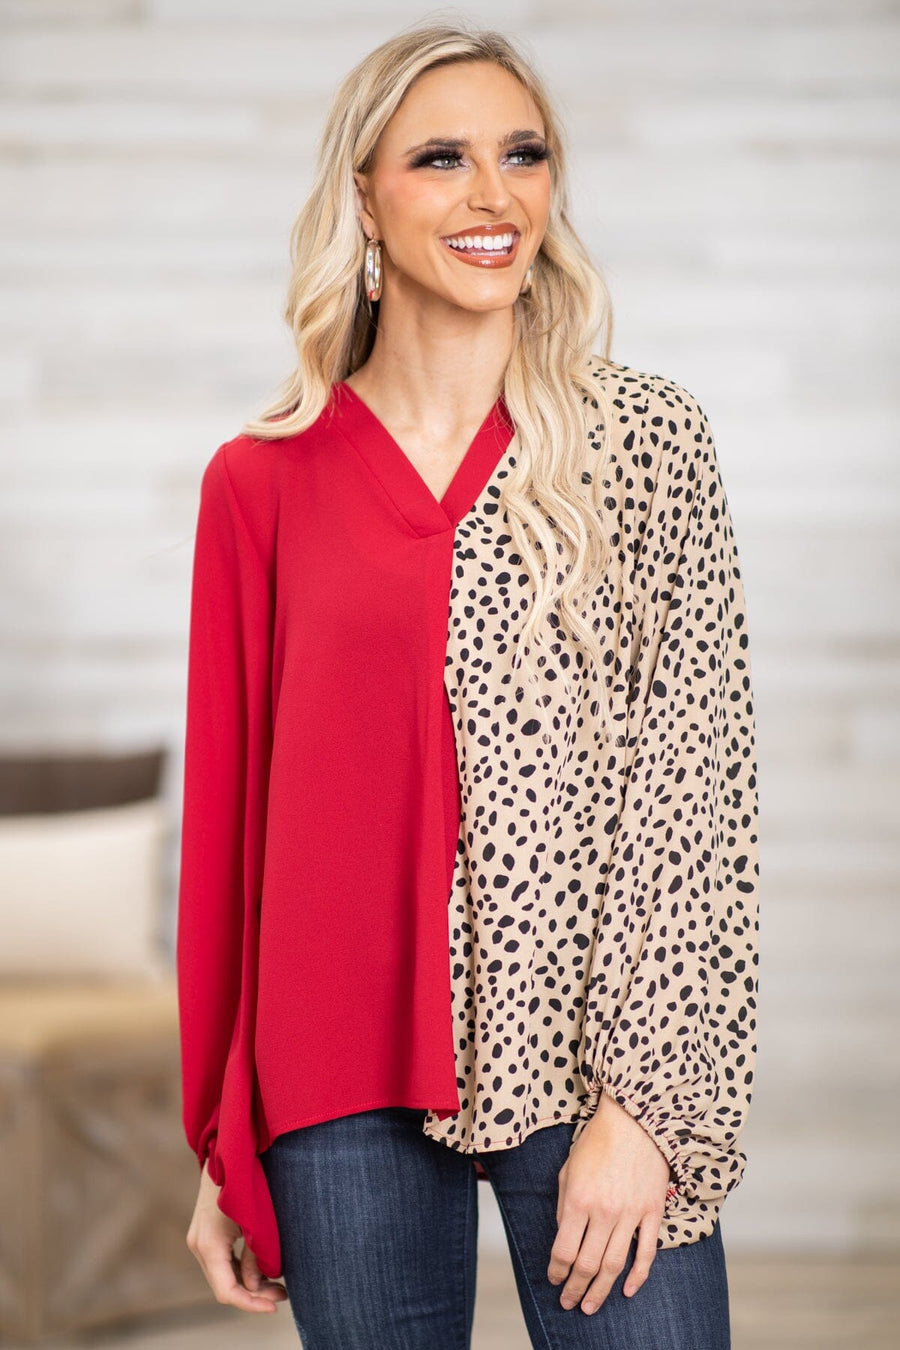 Red and Tan Animal Print Colorblock Top - Filly Flair